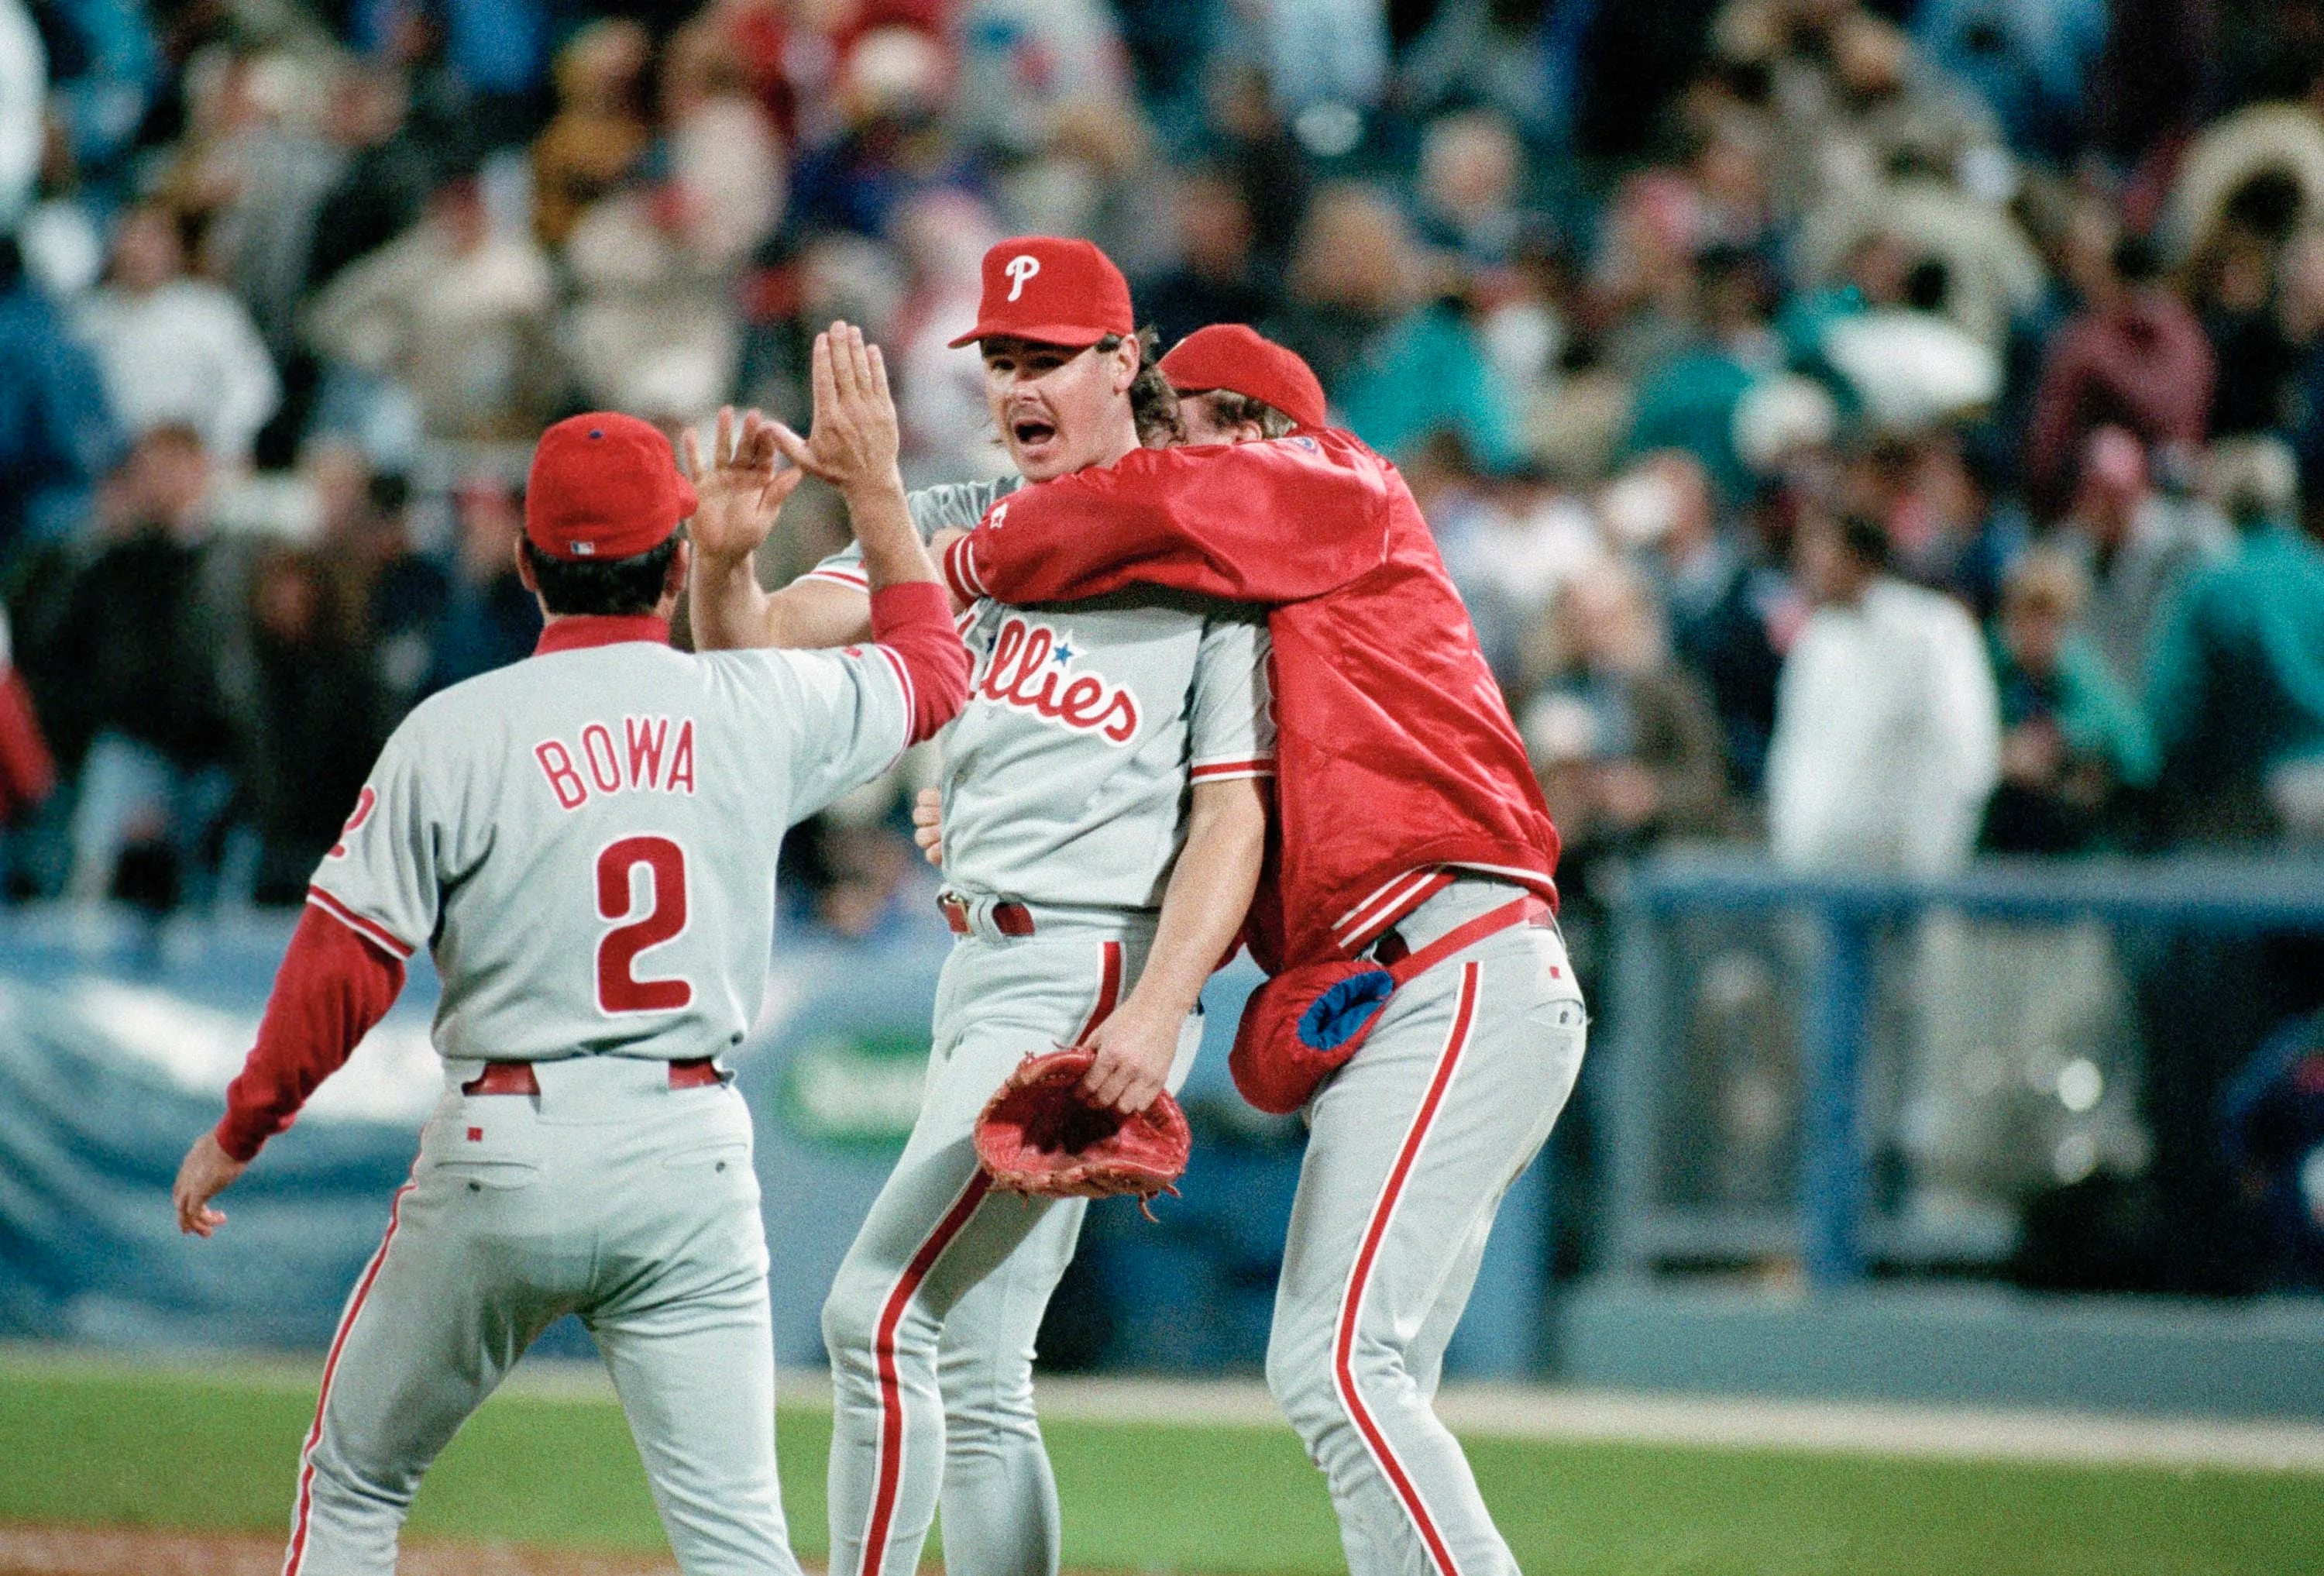 RIP Dutch: Remembering the wild and crazy life of Darren Daulton